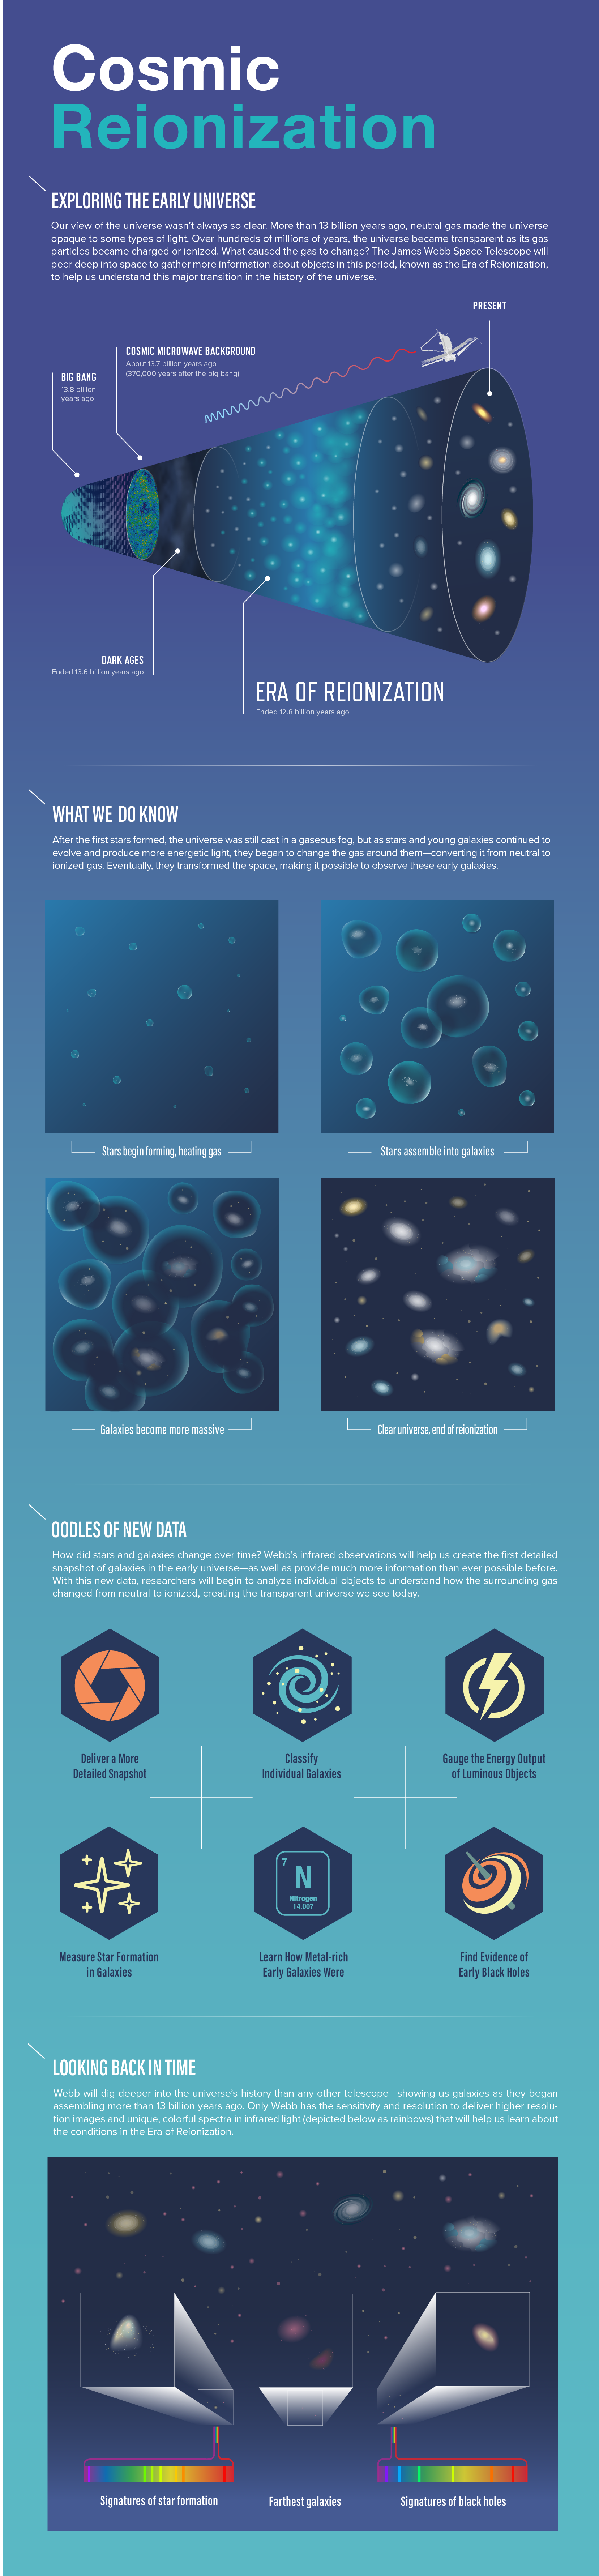 Infographic about Cosmic Reionization